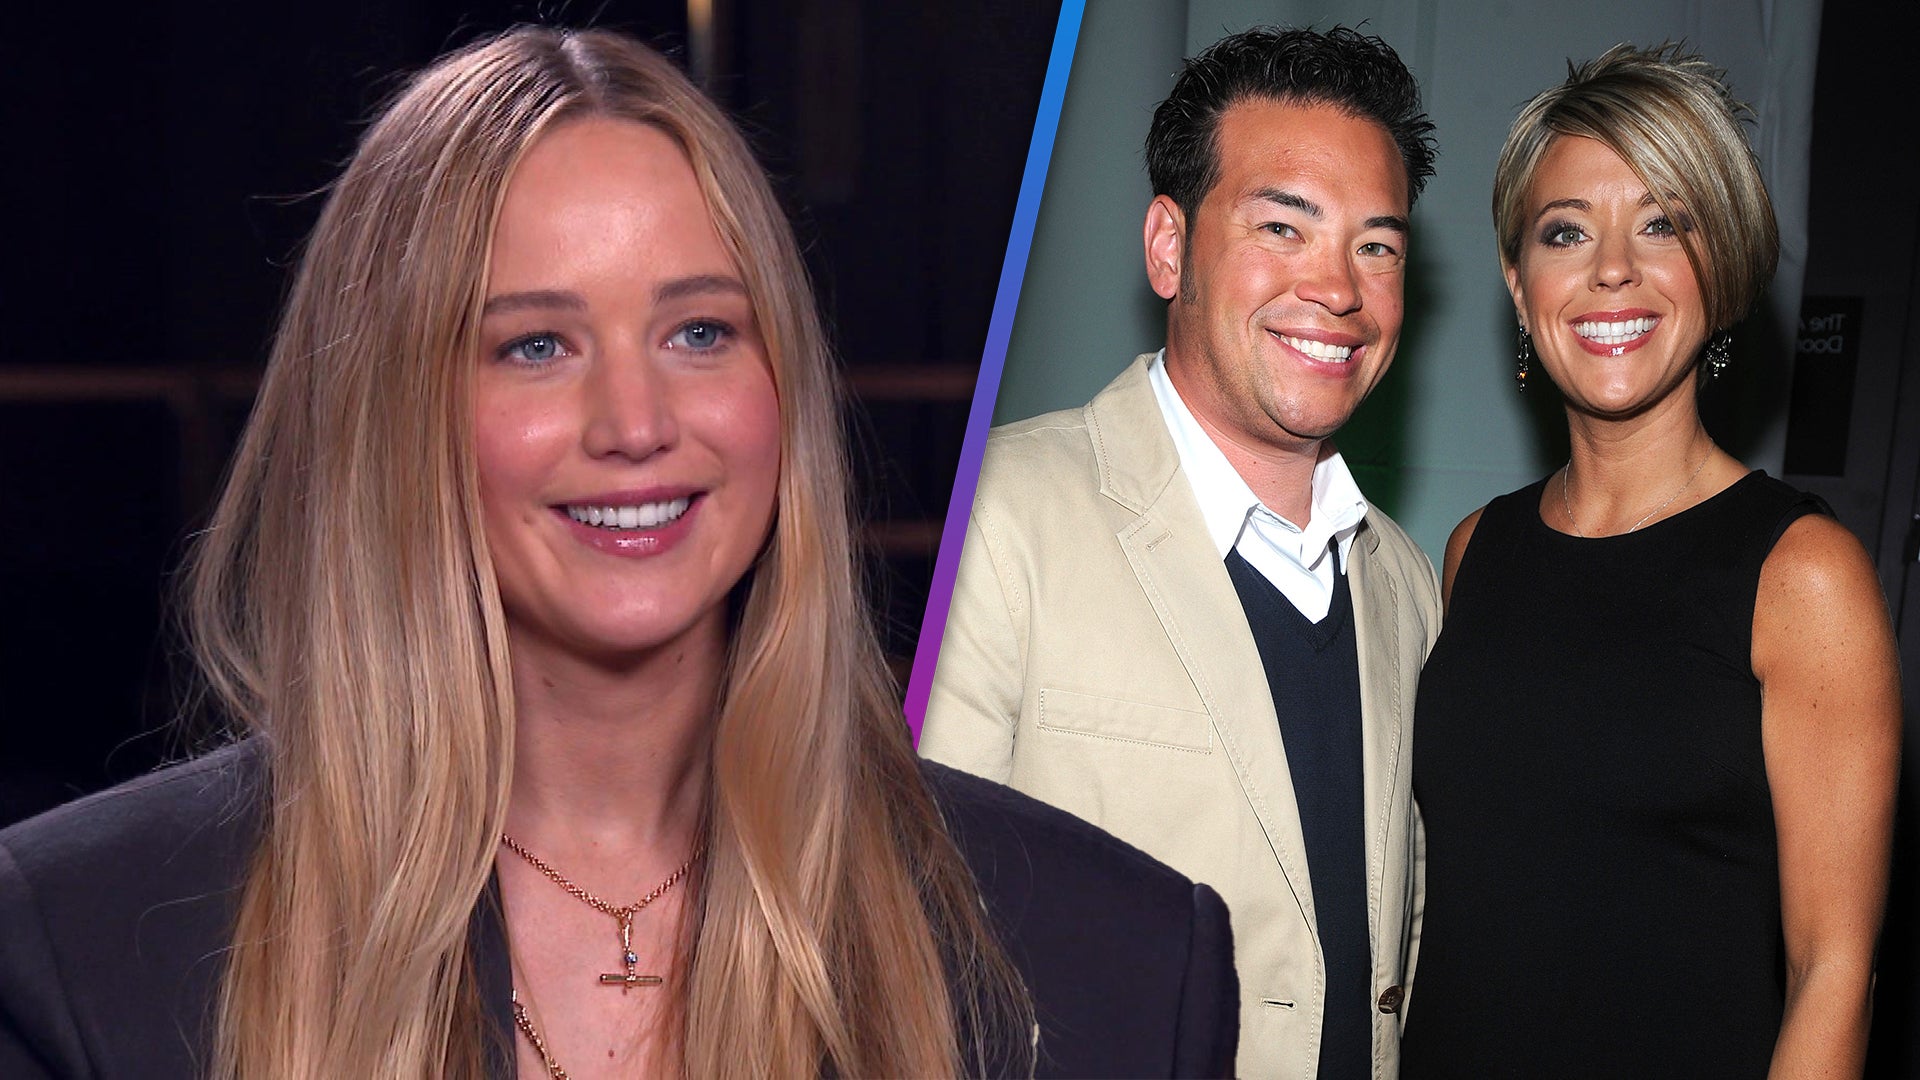 Jennifer Lawrence Compares Her Parenting Style to These Reality TV Stars! (Exclusive)